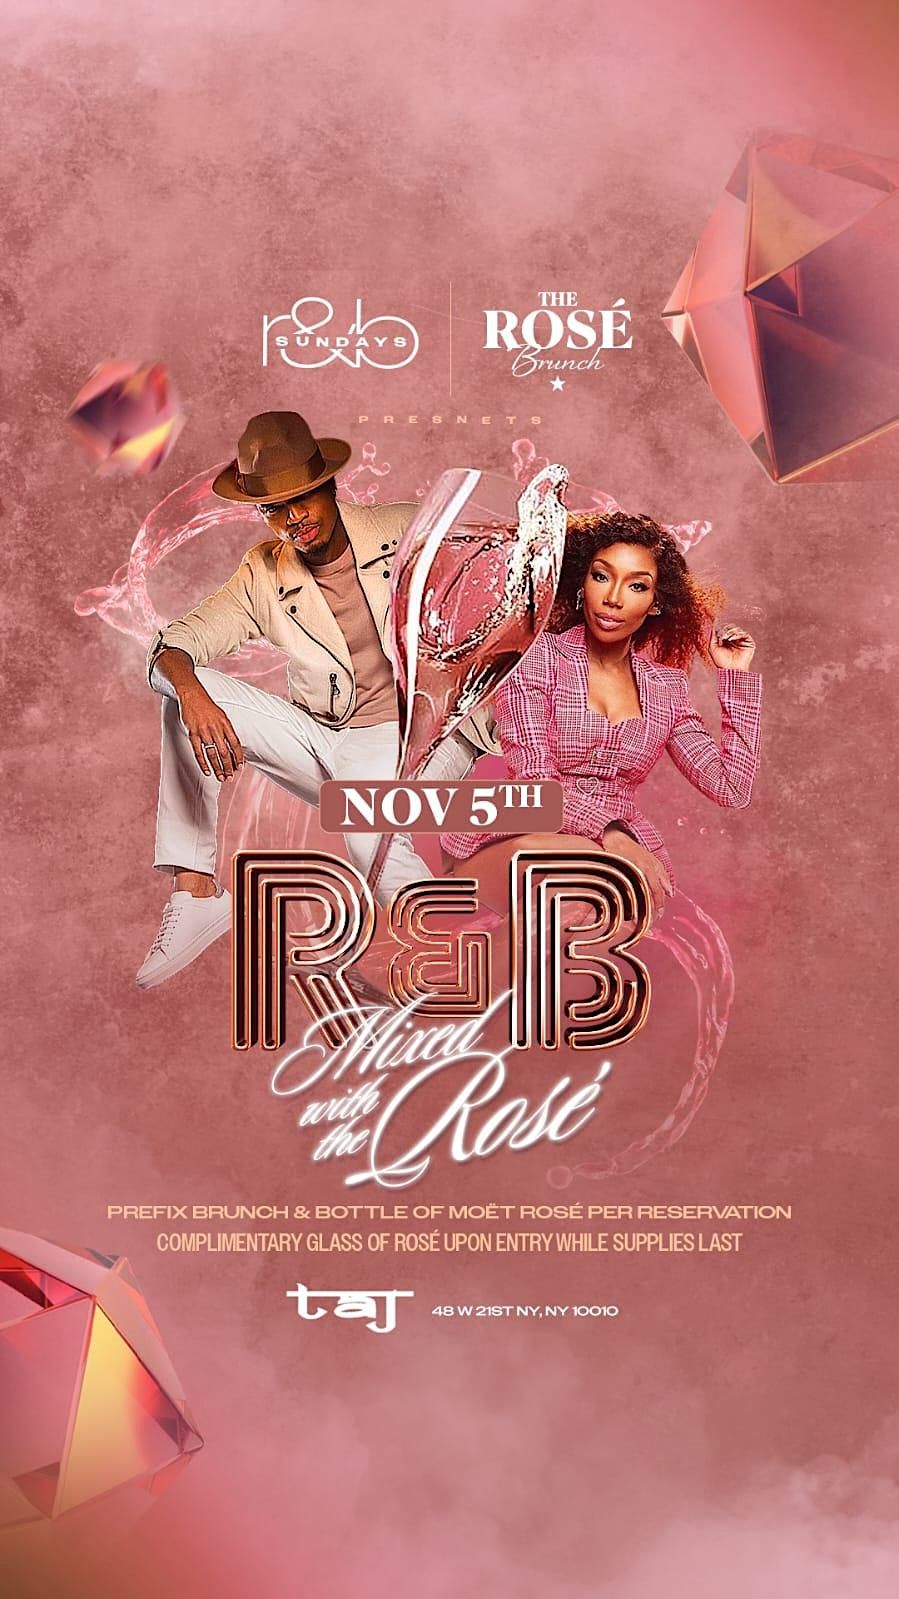 Sun. 11\/05: The Moet Rose R&B Bottomless Brunch & Day Party at TaJ NYC.